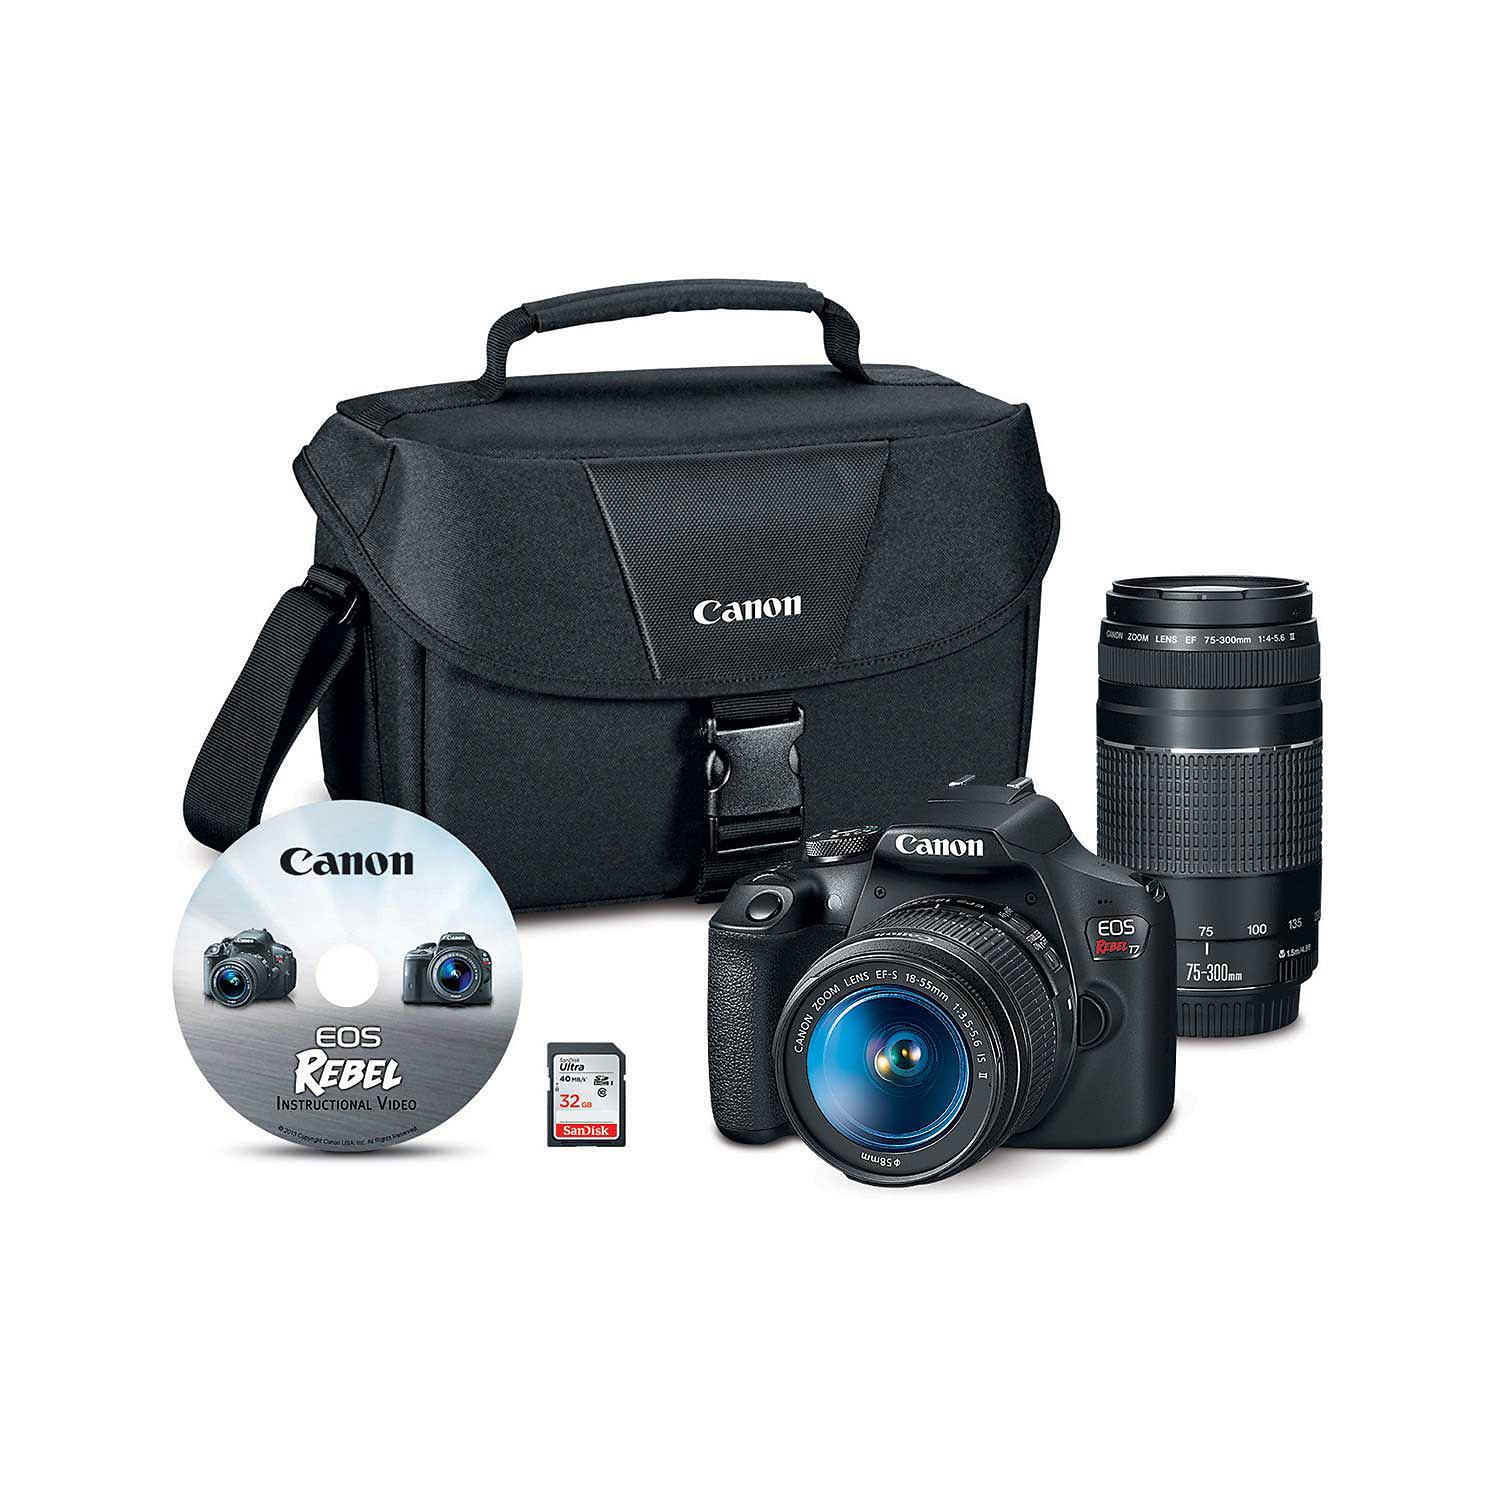 Canon 2727C023 EOS Rebel T7 24.1MP Digital SLR Camera Bundle with EF-S 18-55mm IS Lens, 70-300mm Lens, 32GB SD Card - image 1 of 4